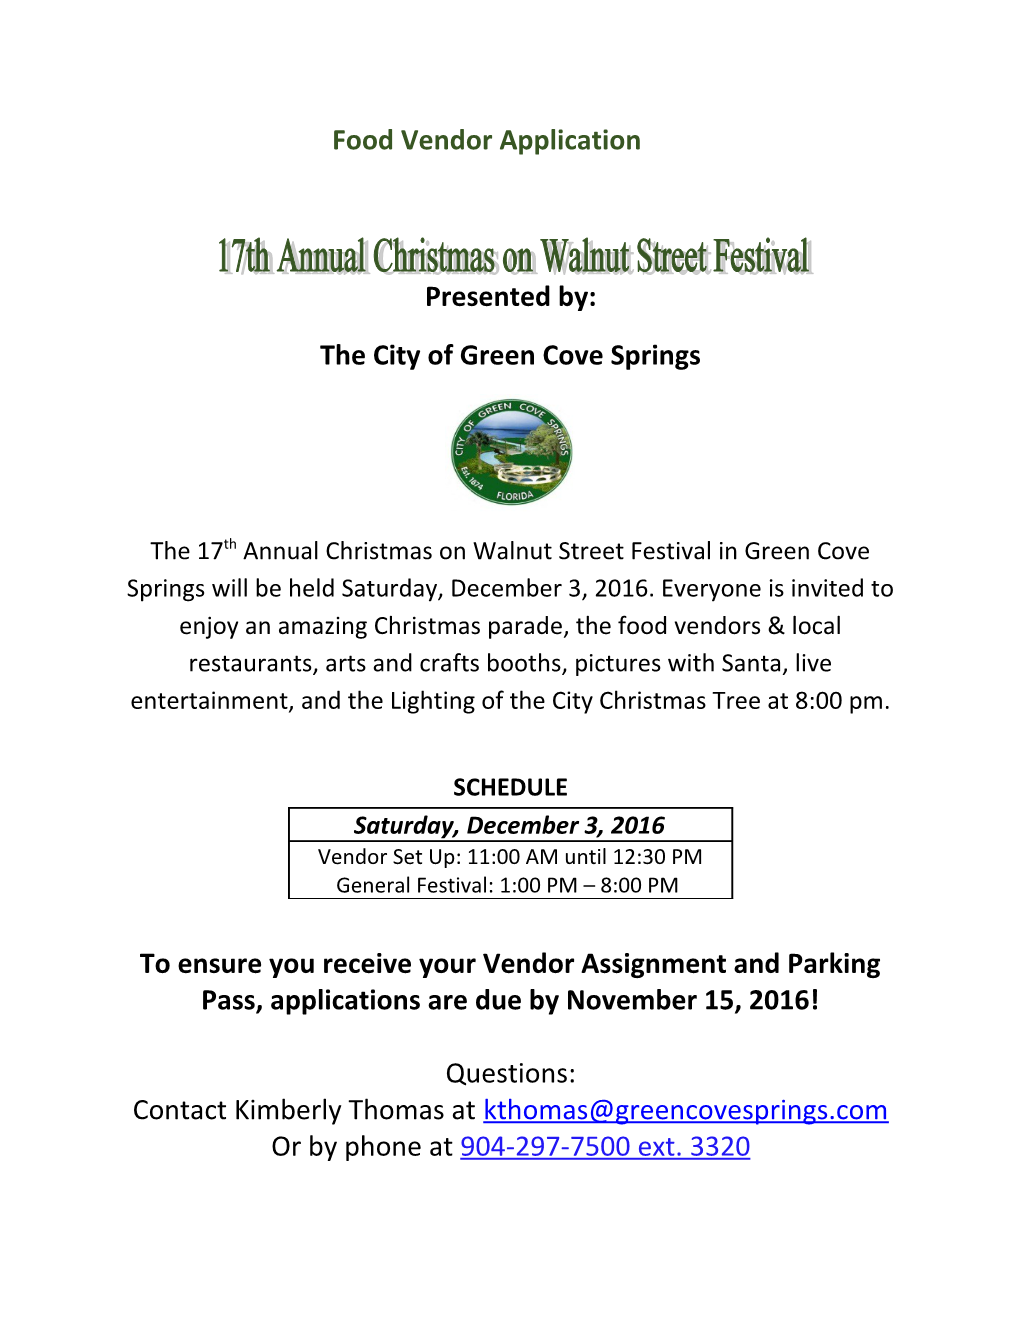 The City of Green Cove Springs